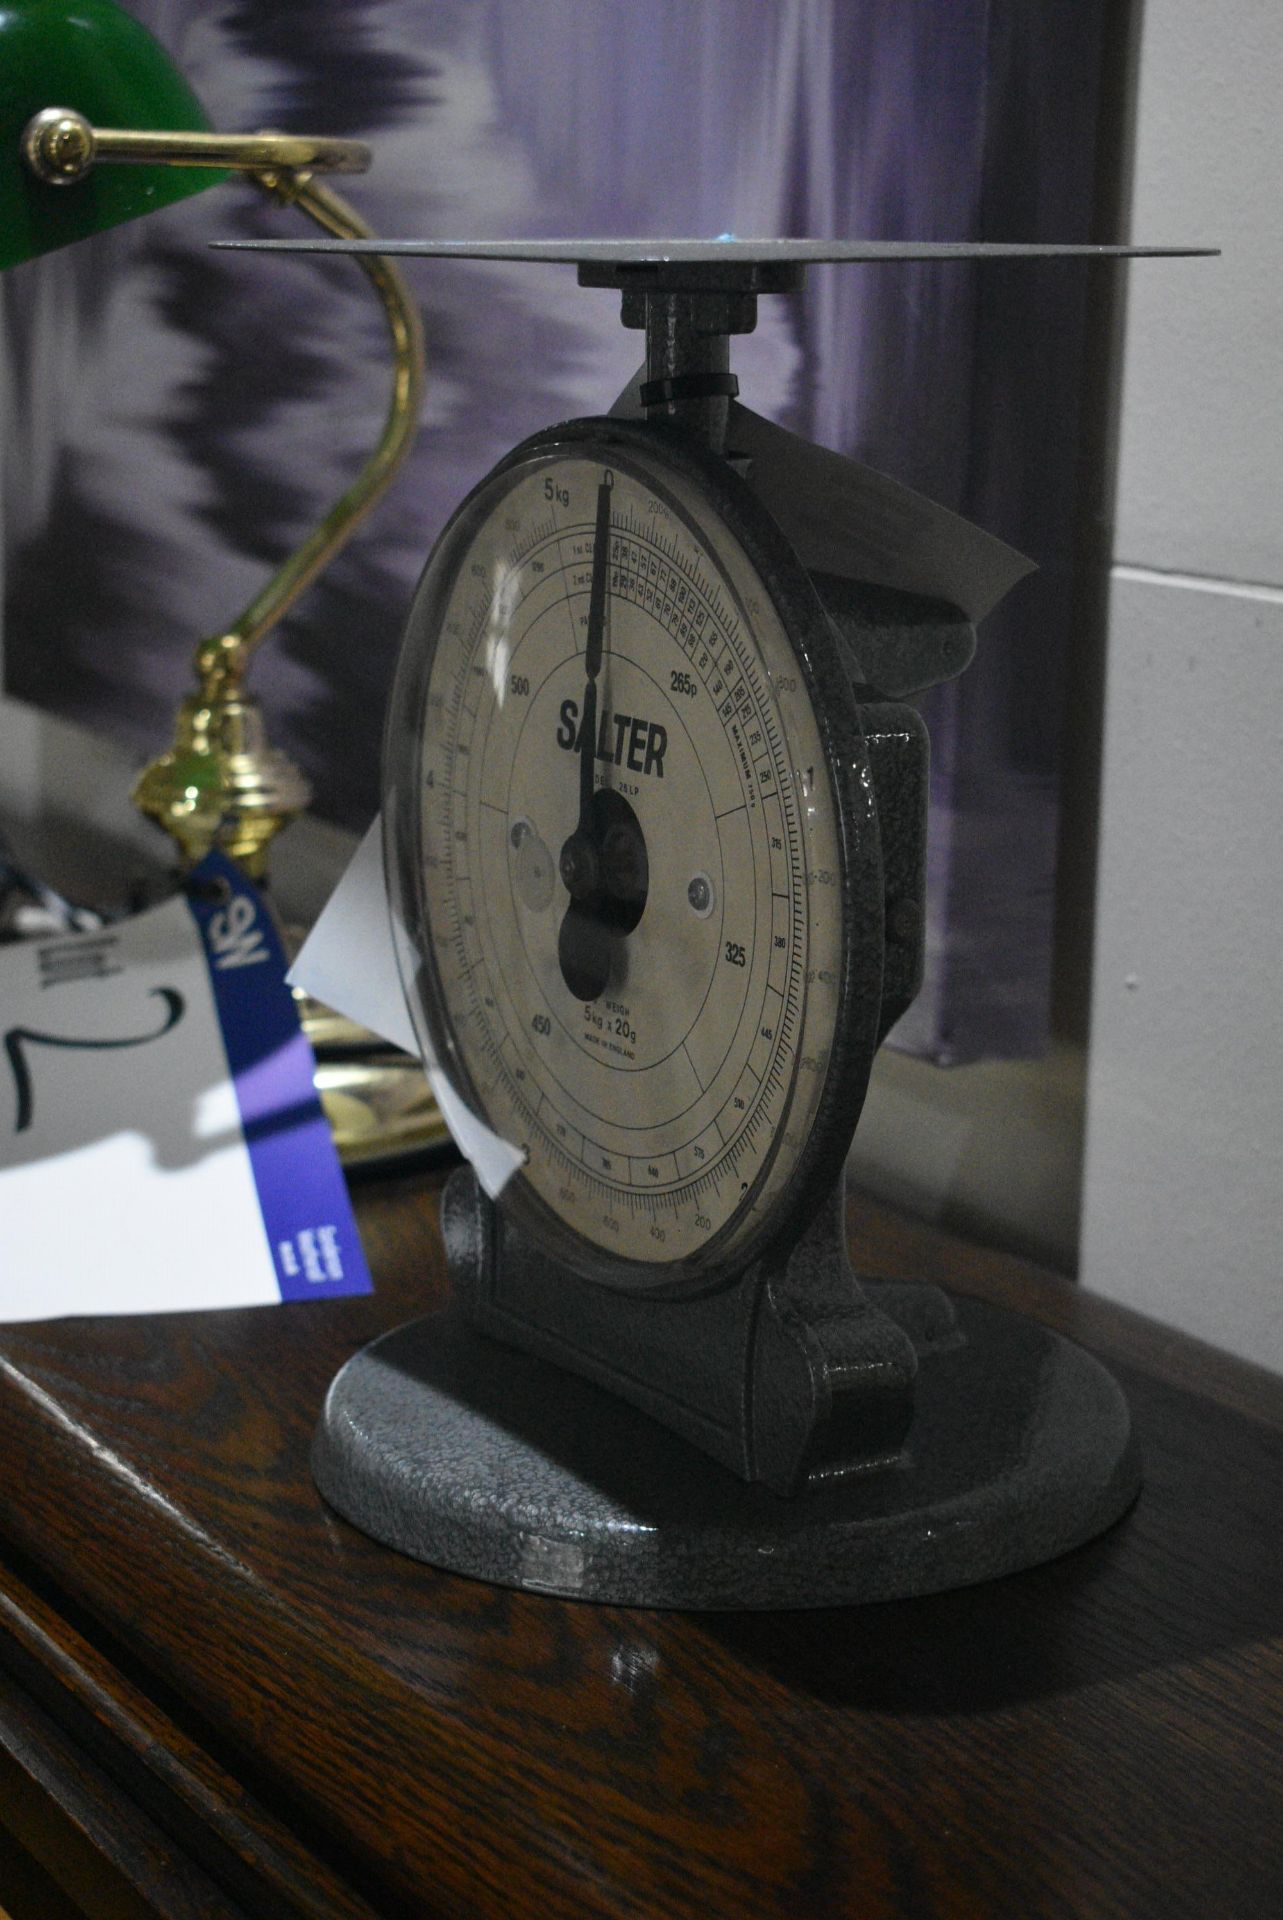 Soltar 5kg Postal Scales (note this lot is not sub - Image 2 of 3